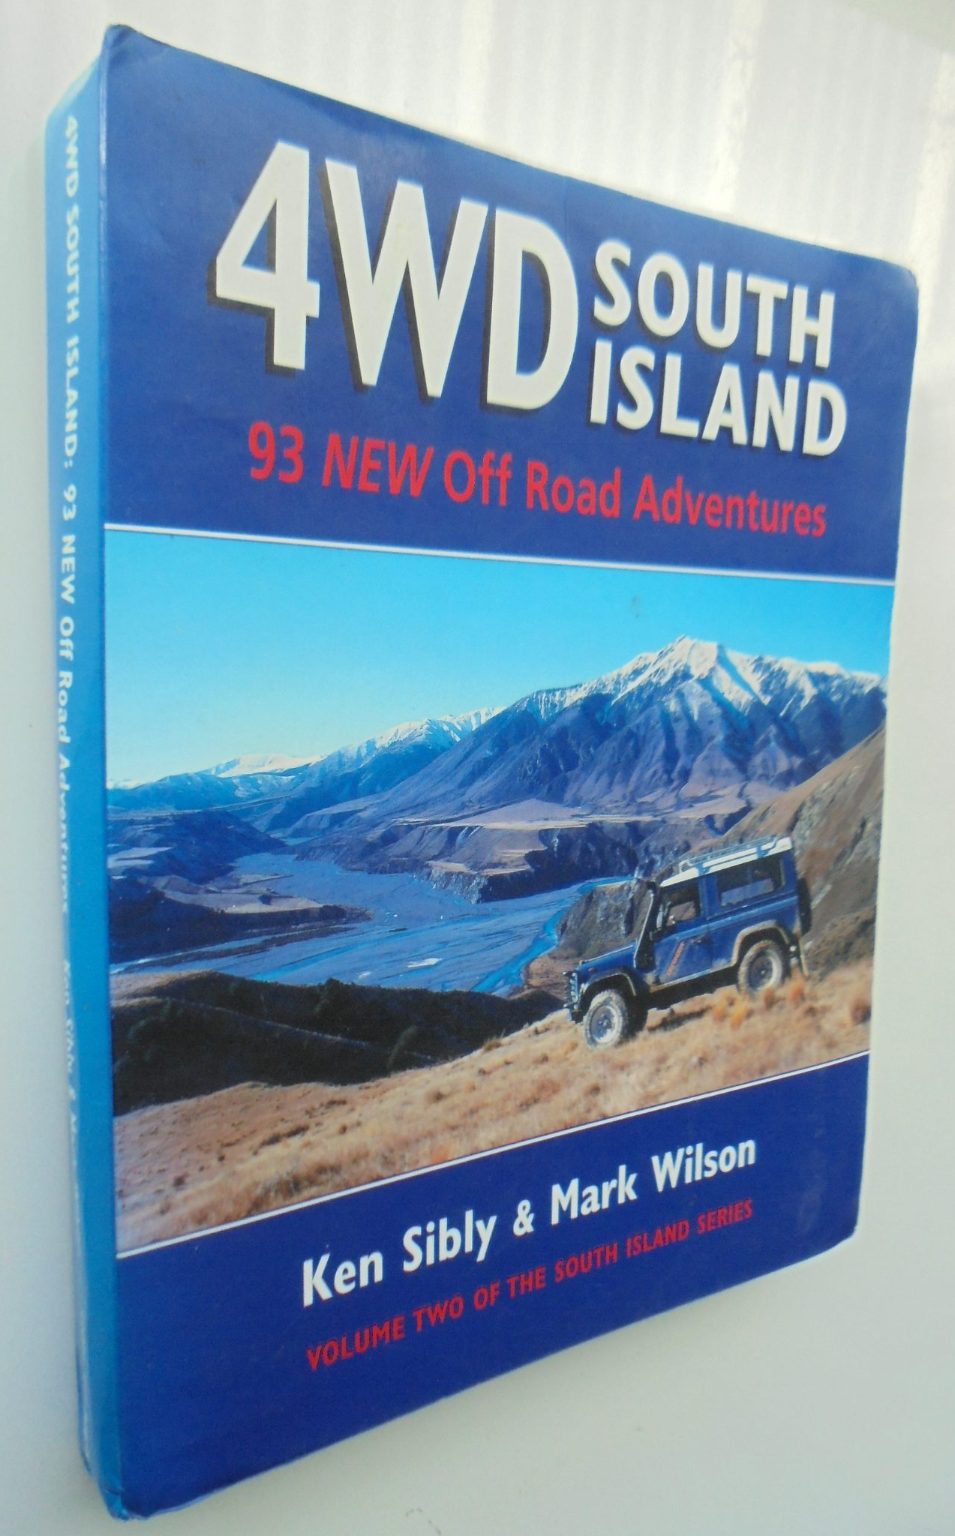 4wd South Island 93 New off Road Adventures: Vol 2. By Ken Sibly, Mark Wilson